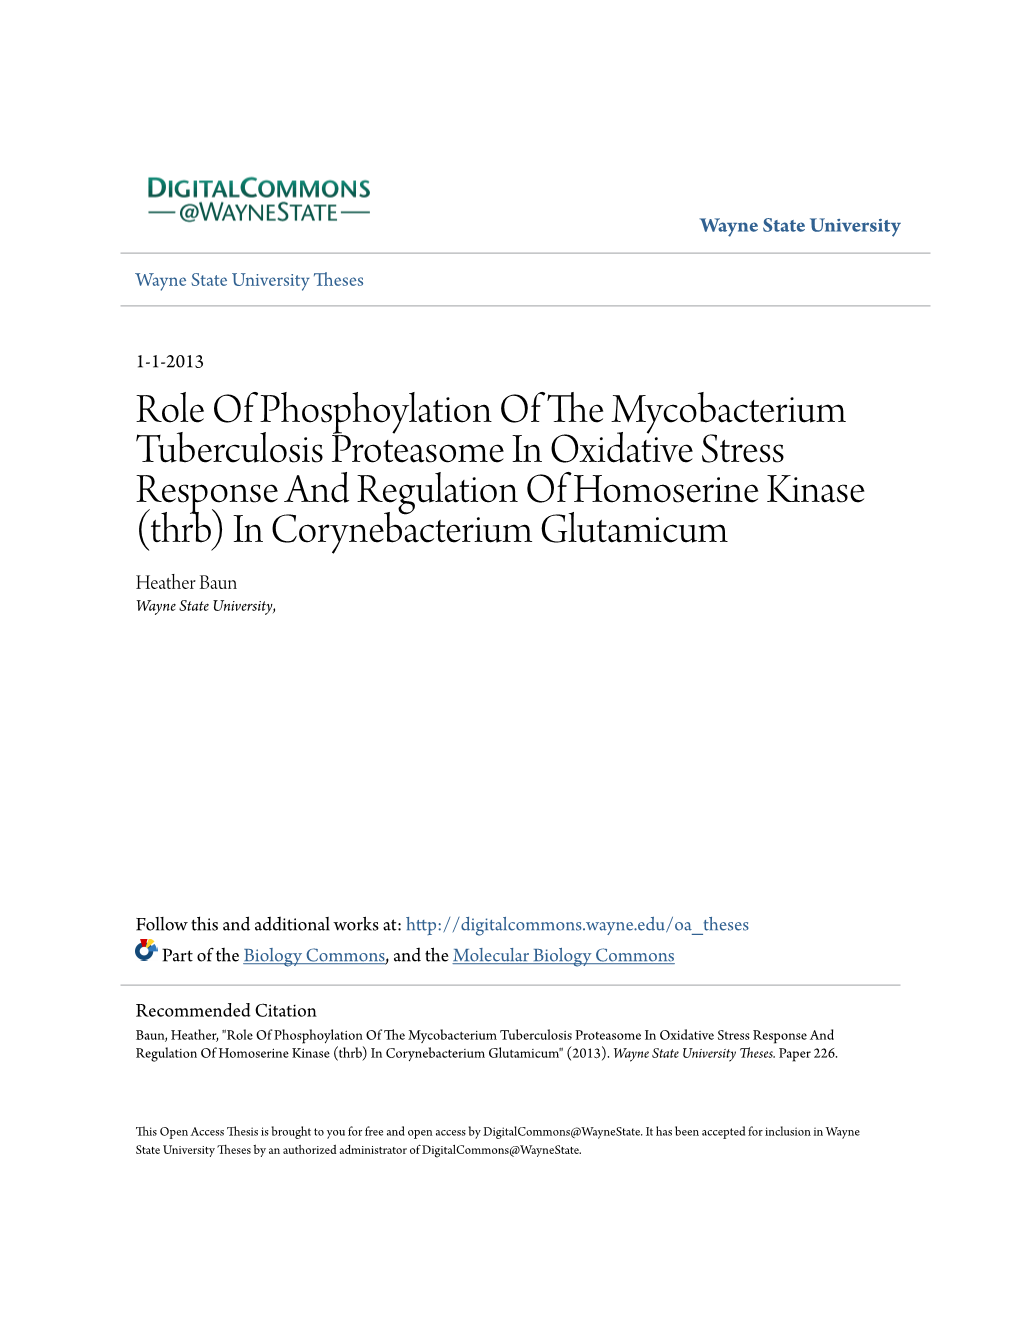 Role of Phosphoylation of the Mycobacterium Tuberculosis Proteasome in Oxidative Stress Response and Regulation of Homoserine Ki